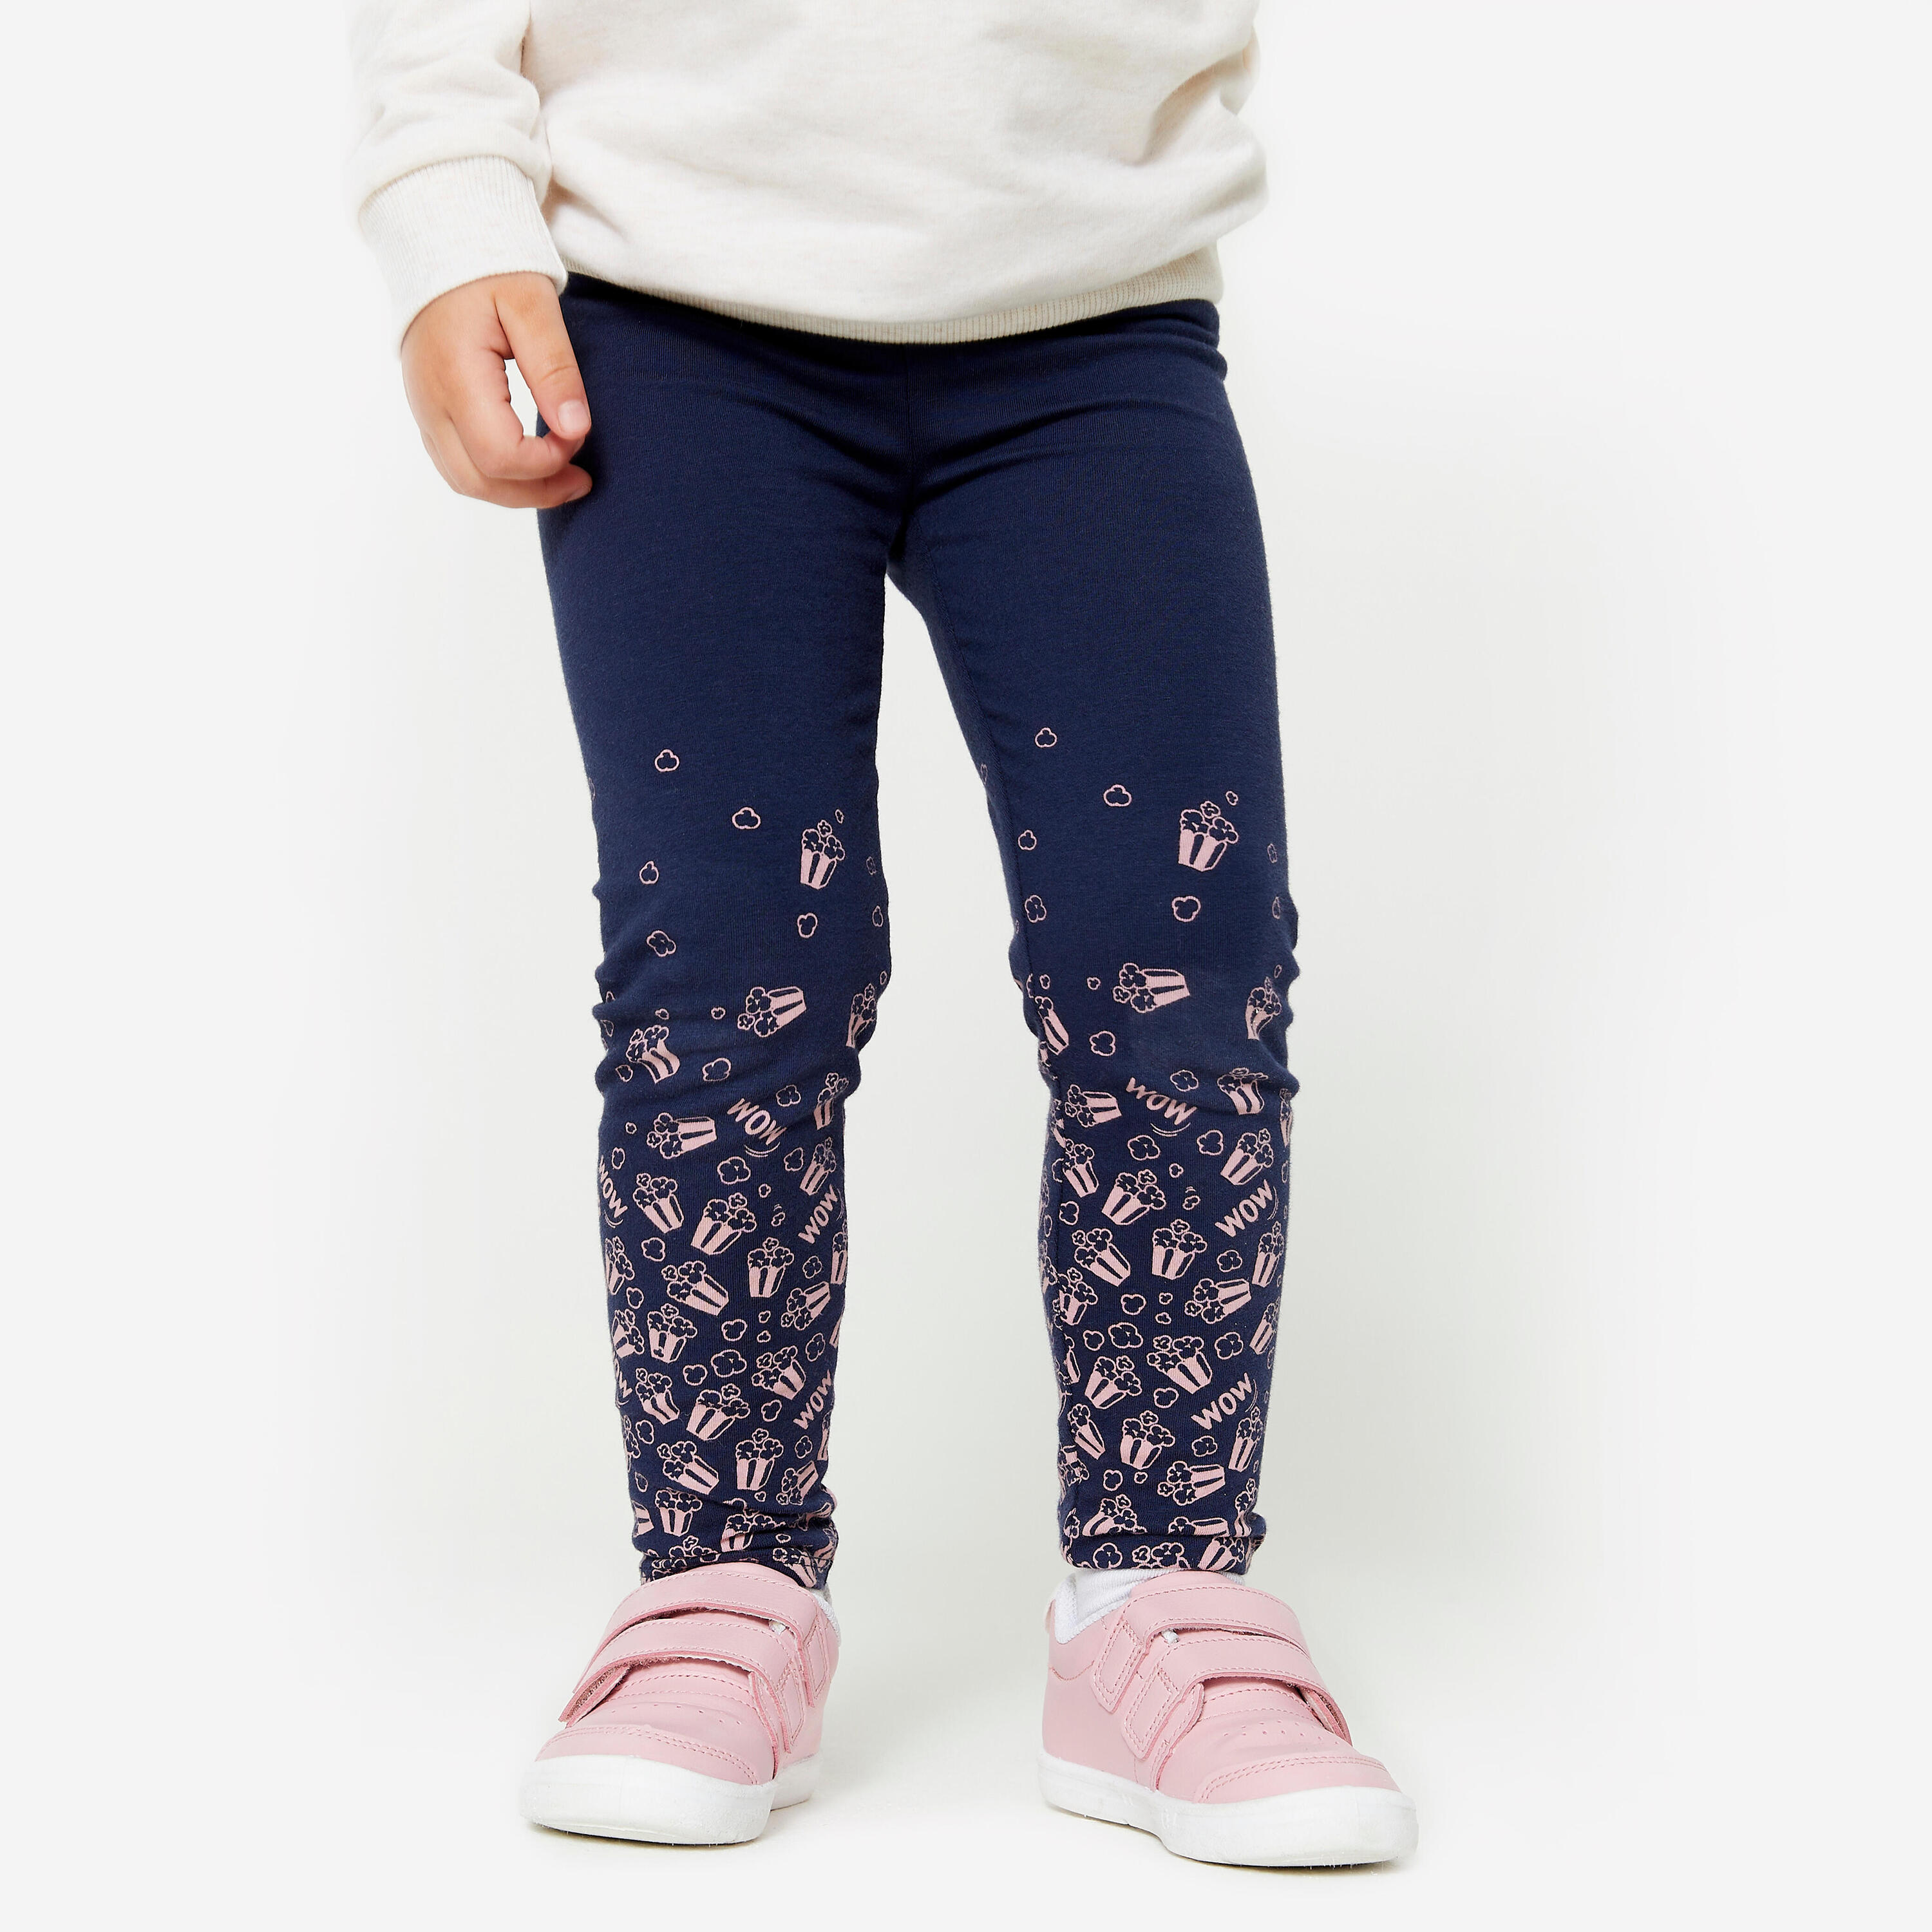 DOMYOS Baby Basic Cotton Leggings - Blue/Pink with Patterns